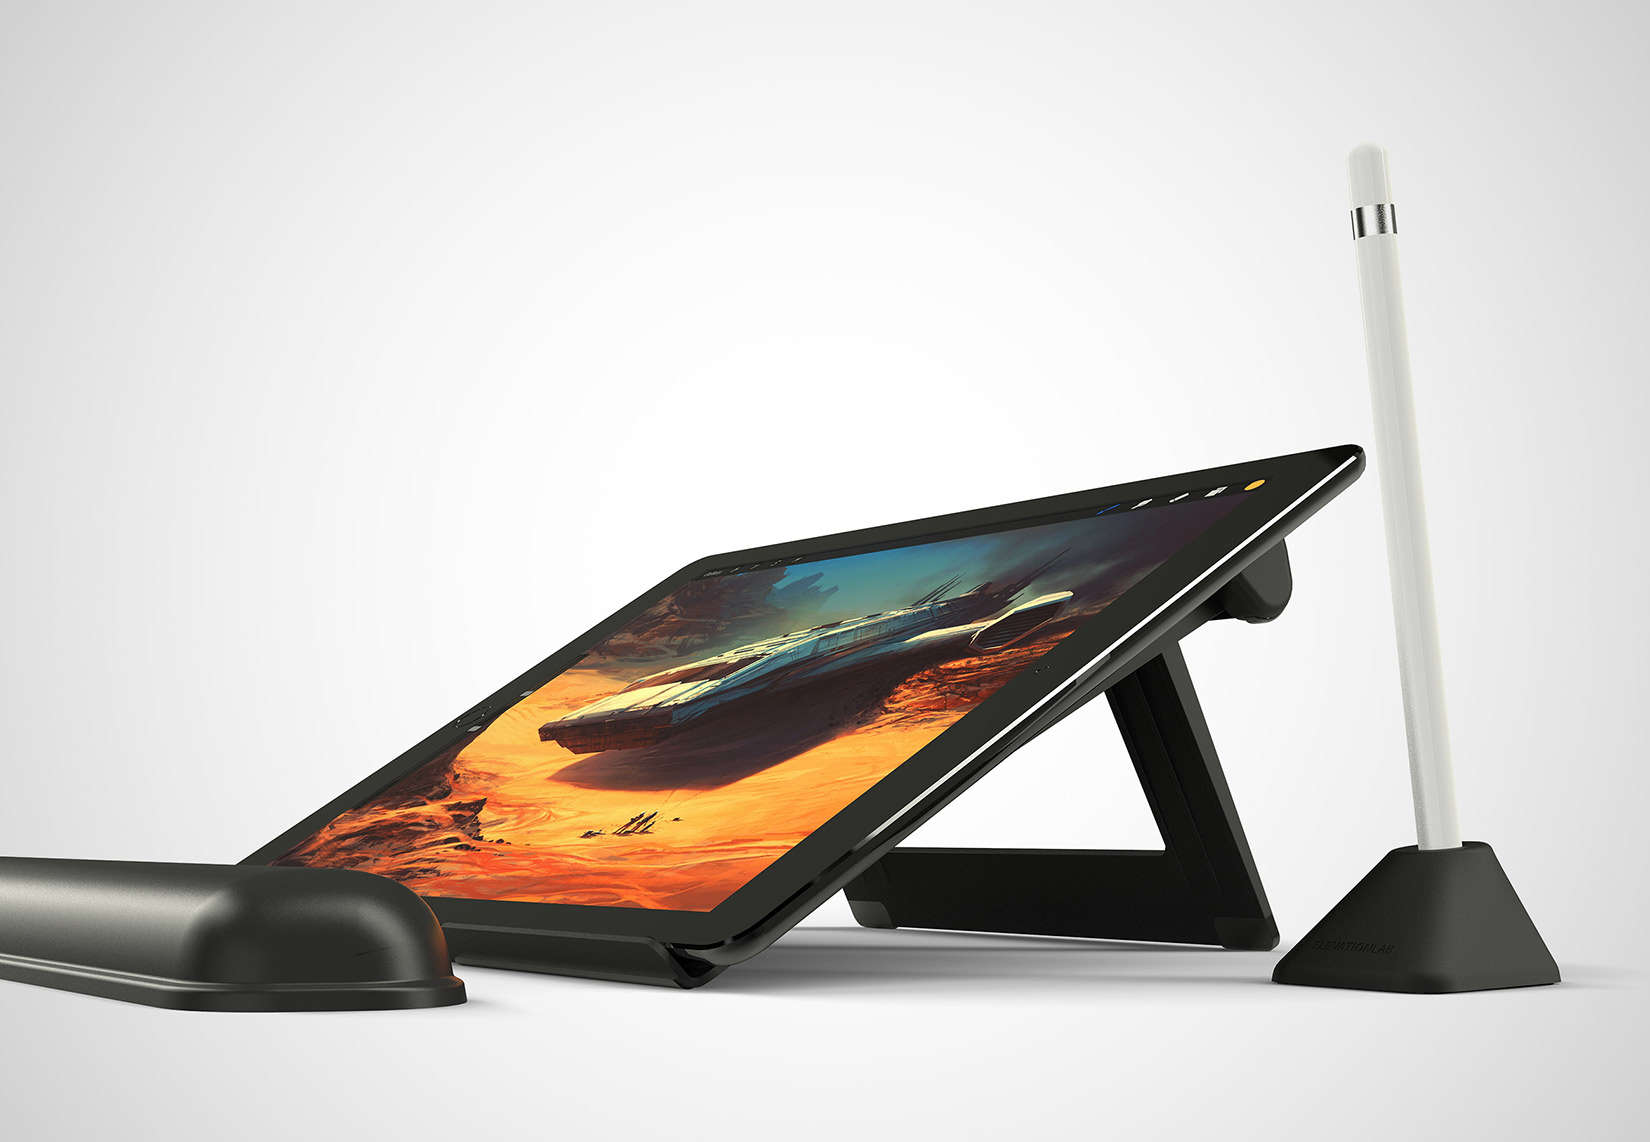 ElevationLab created DraftTable because a steady drawing hands needs a steady stand for the iPad Pro.